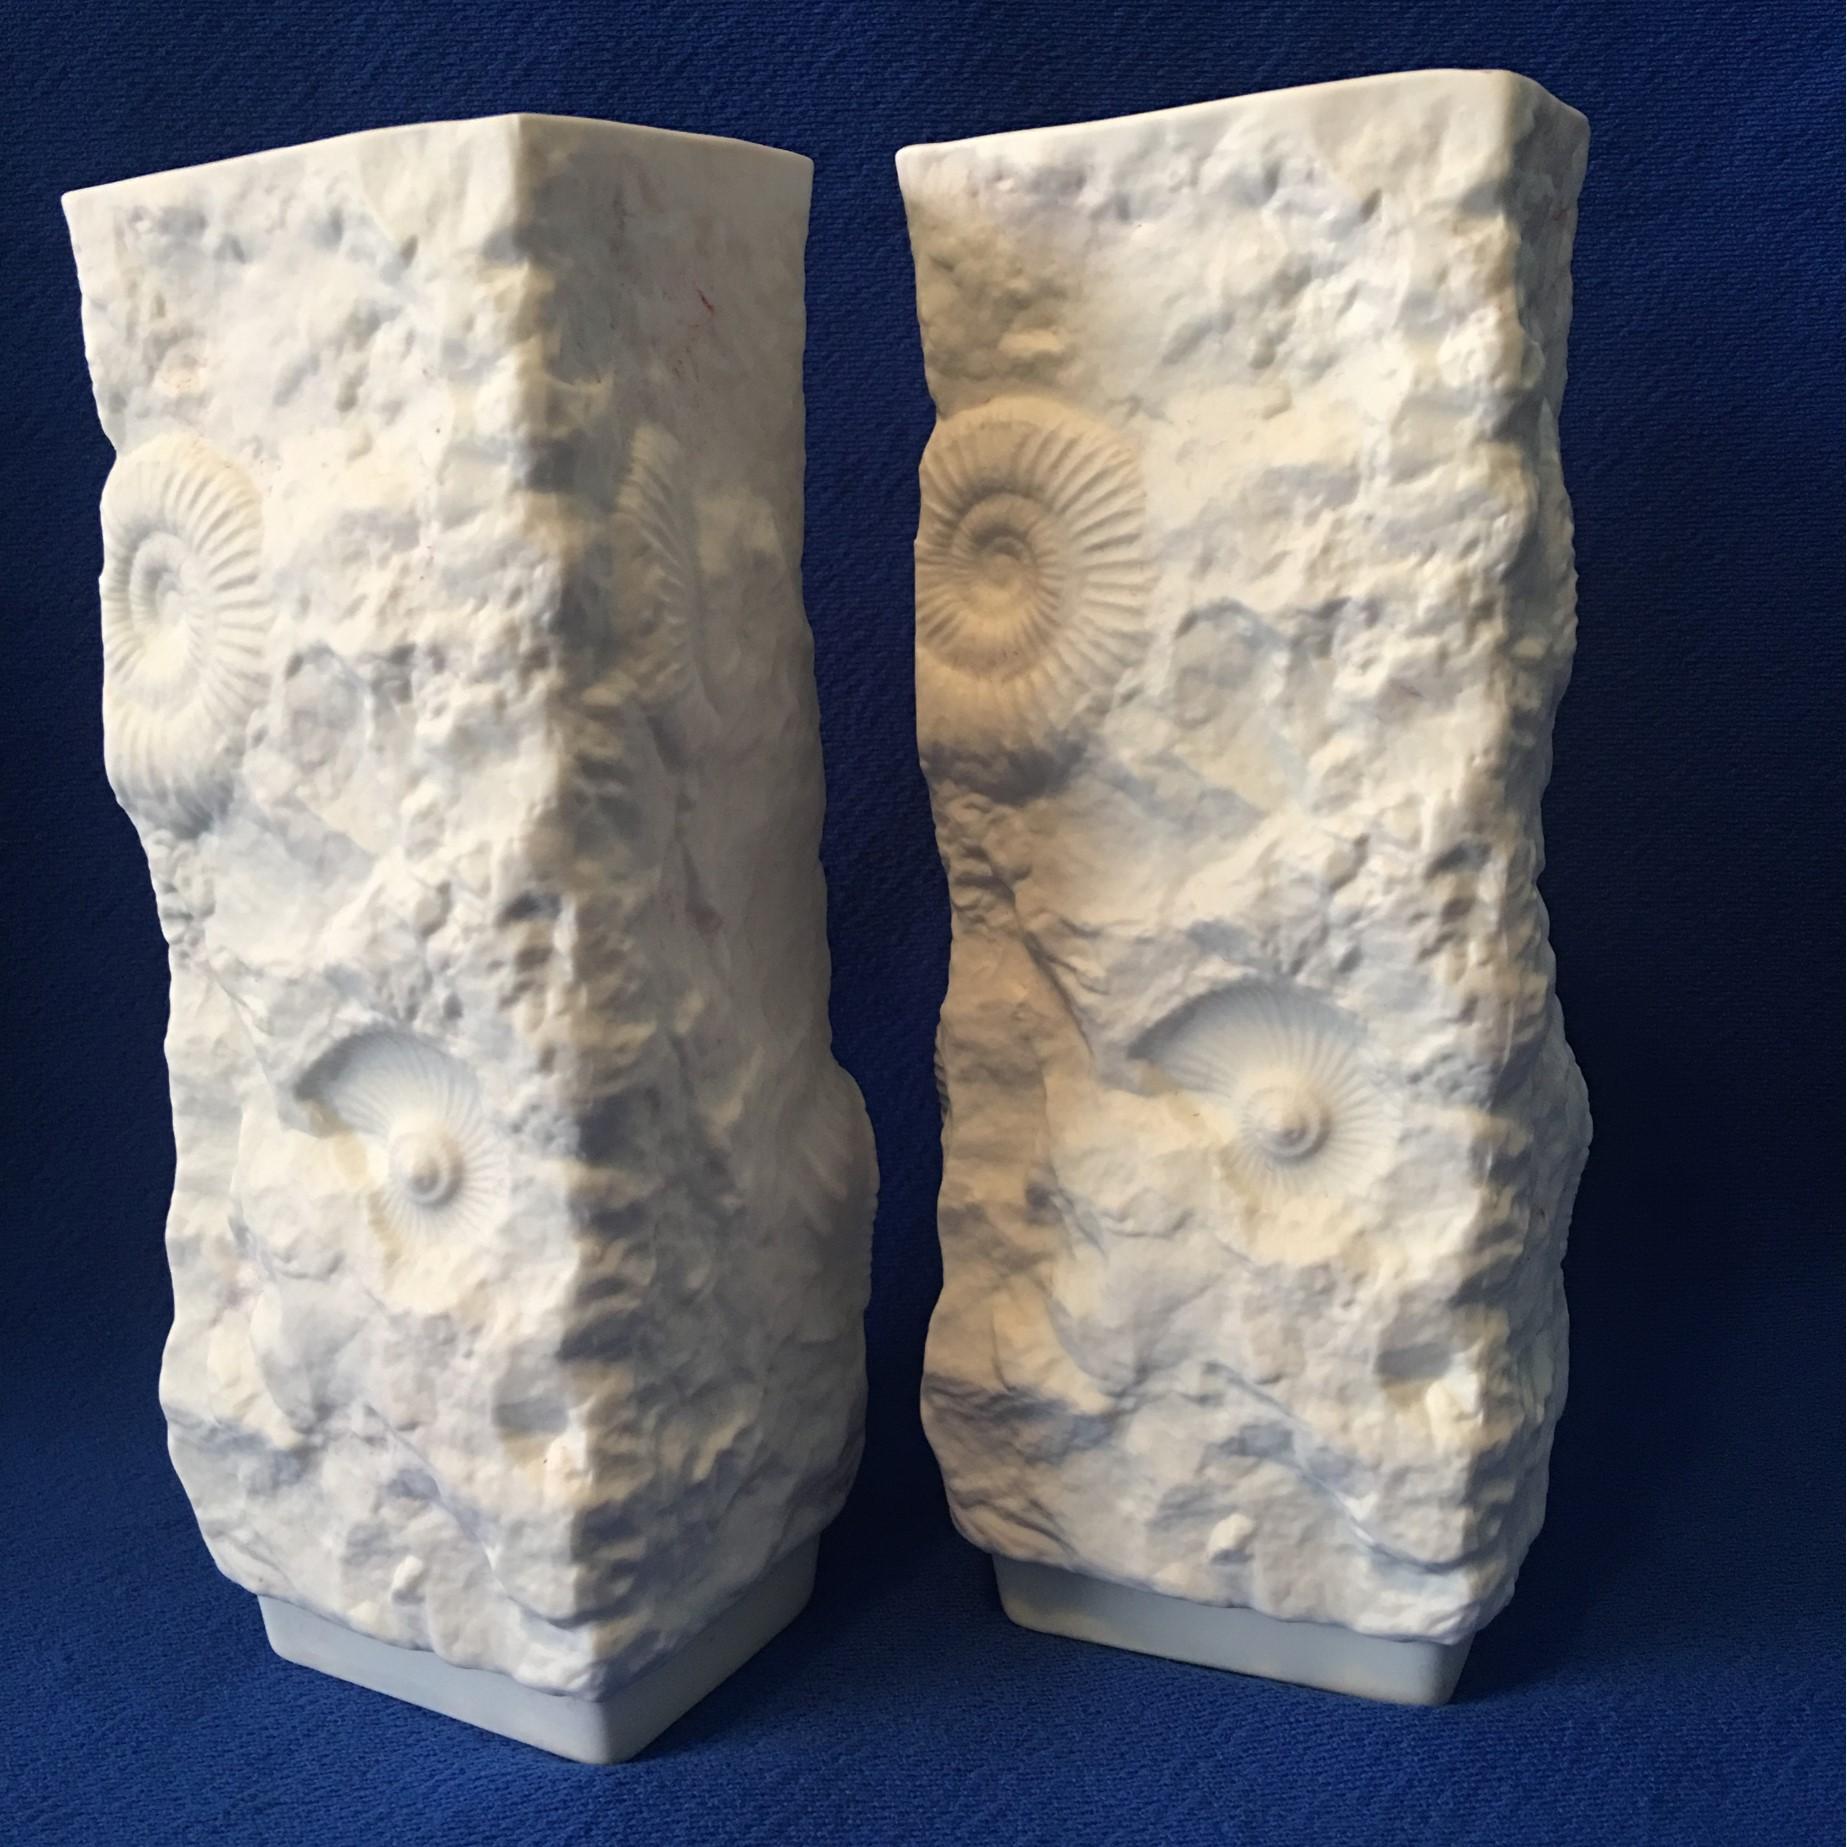 A beautiful pair of white fossil rock Matte Vases from the German Porcelain manufacturer Kaiser. Lovely pieces for any room and decor.